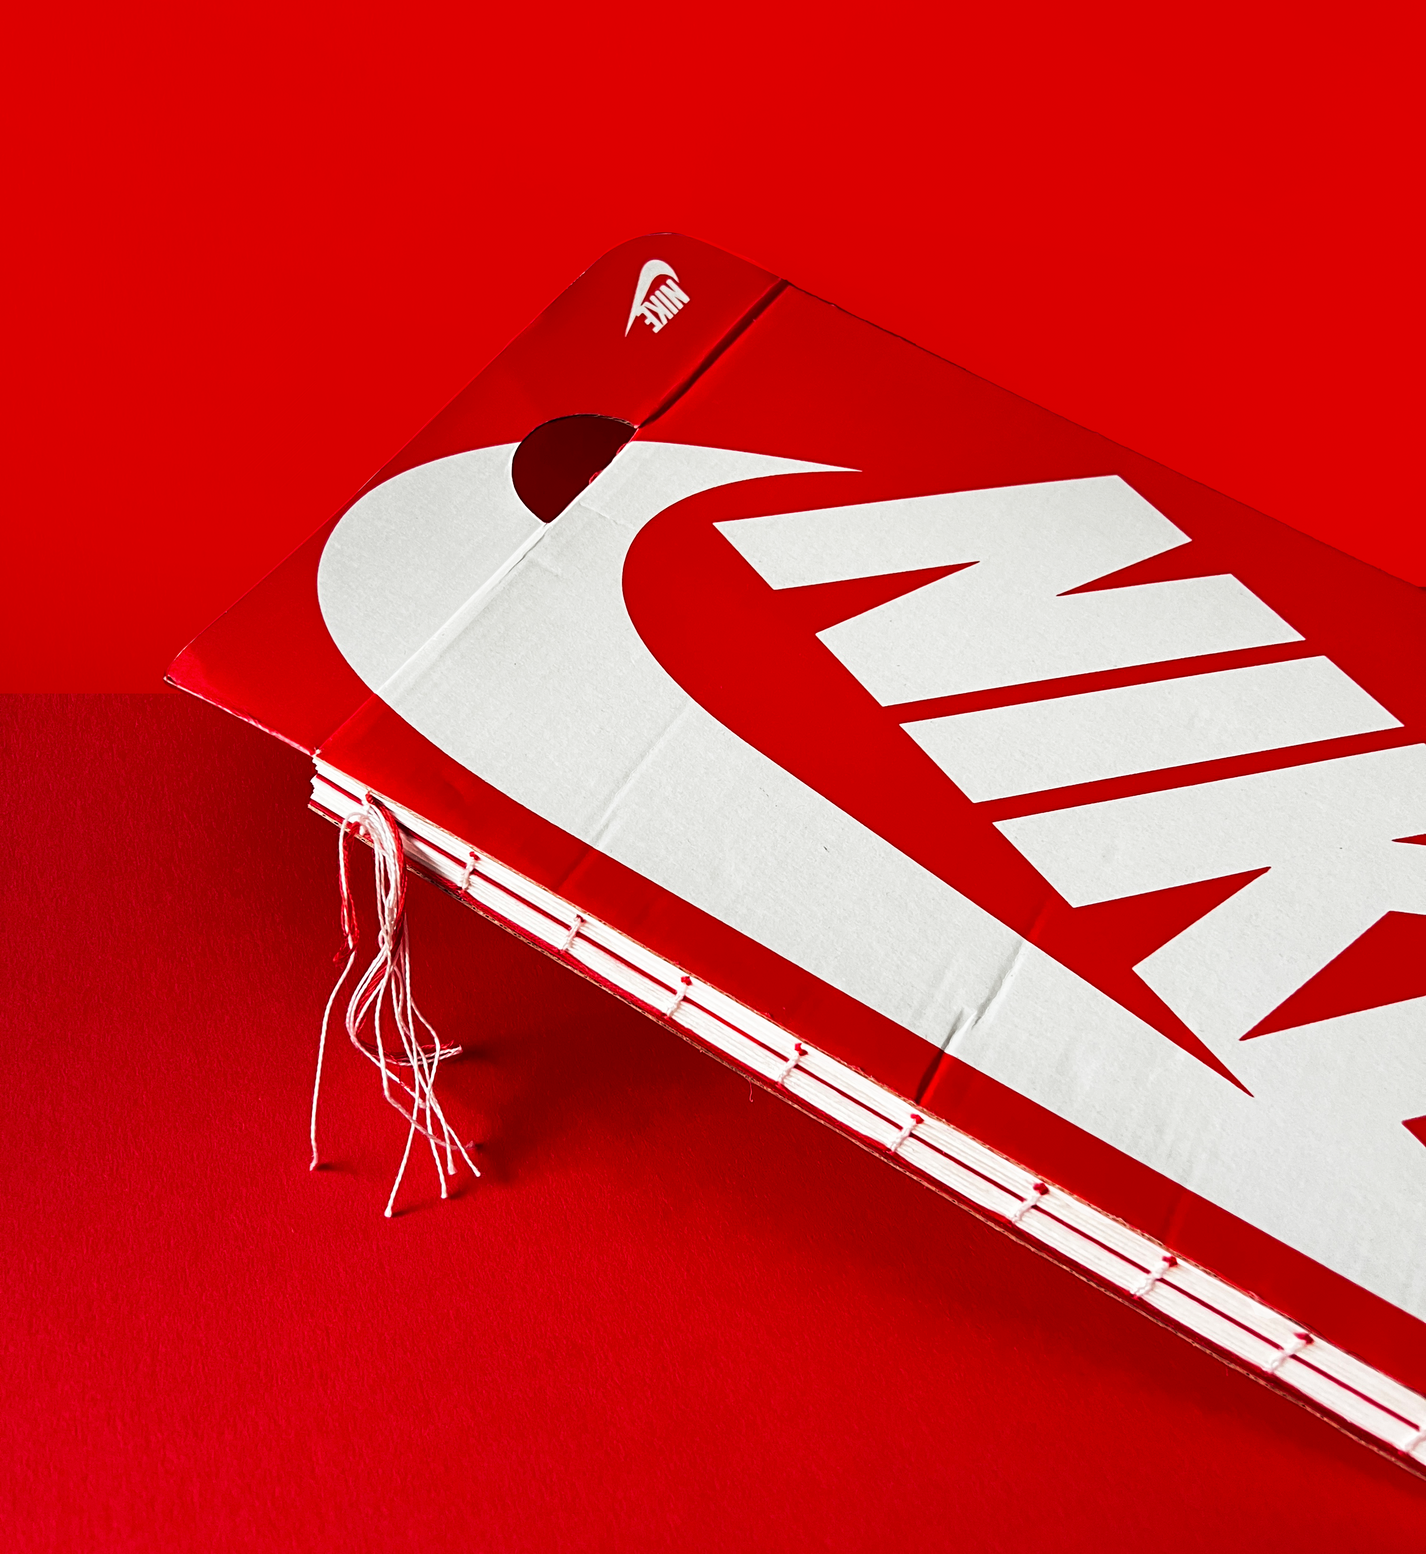 I turned a Nike Shoebox into a journal. The exposed strings emulate Nike laces and clothing, and the shape almost emulates that of a fuel carton. 